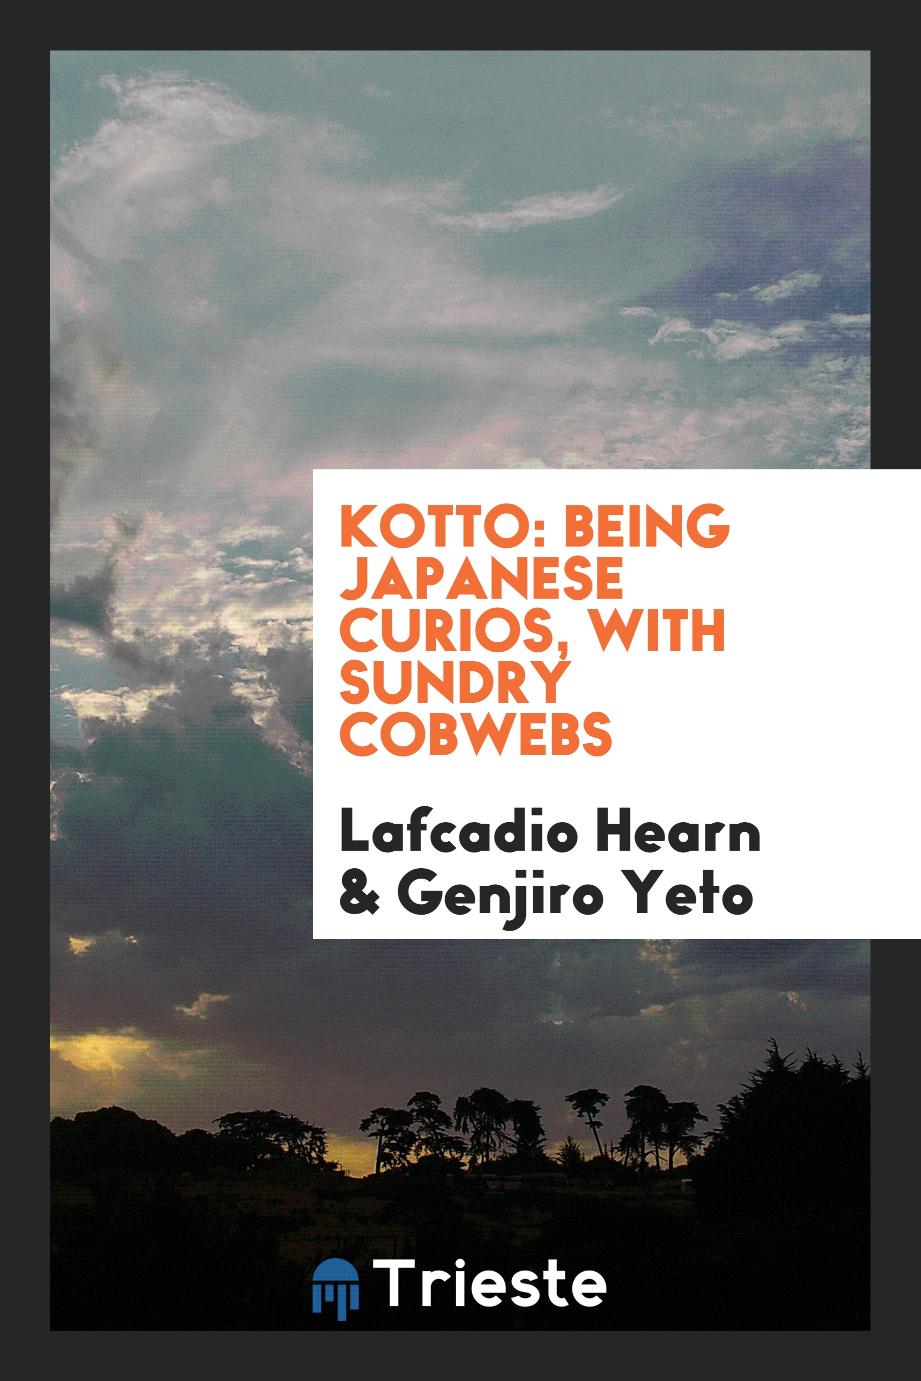 Kotto: being Japanese curios, with sundry cobwebs